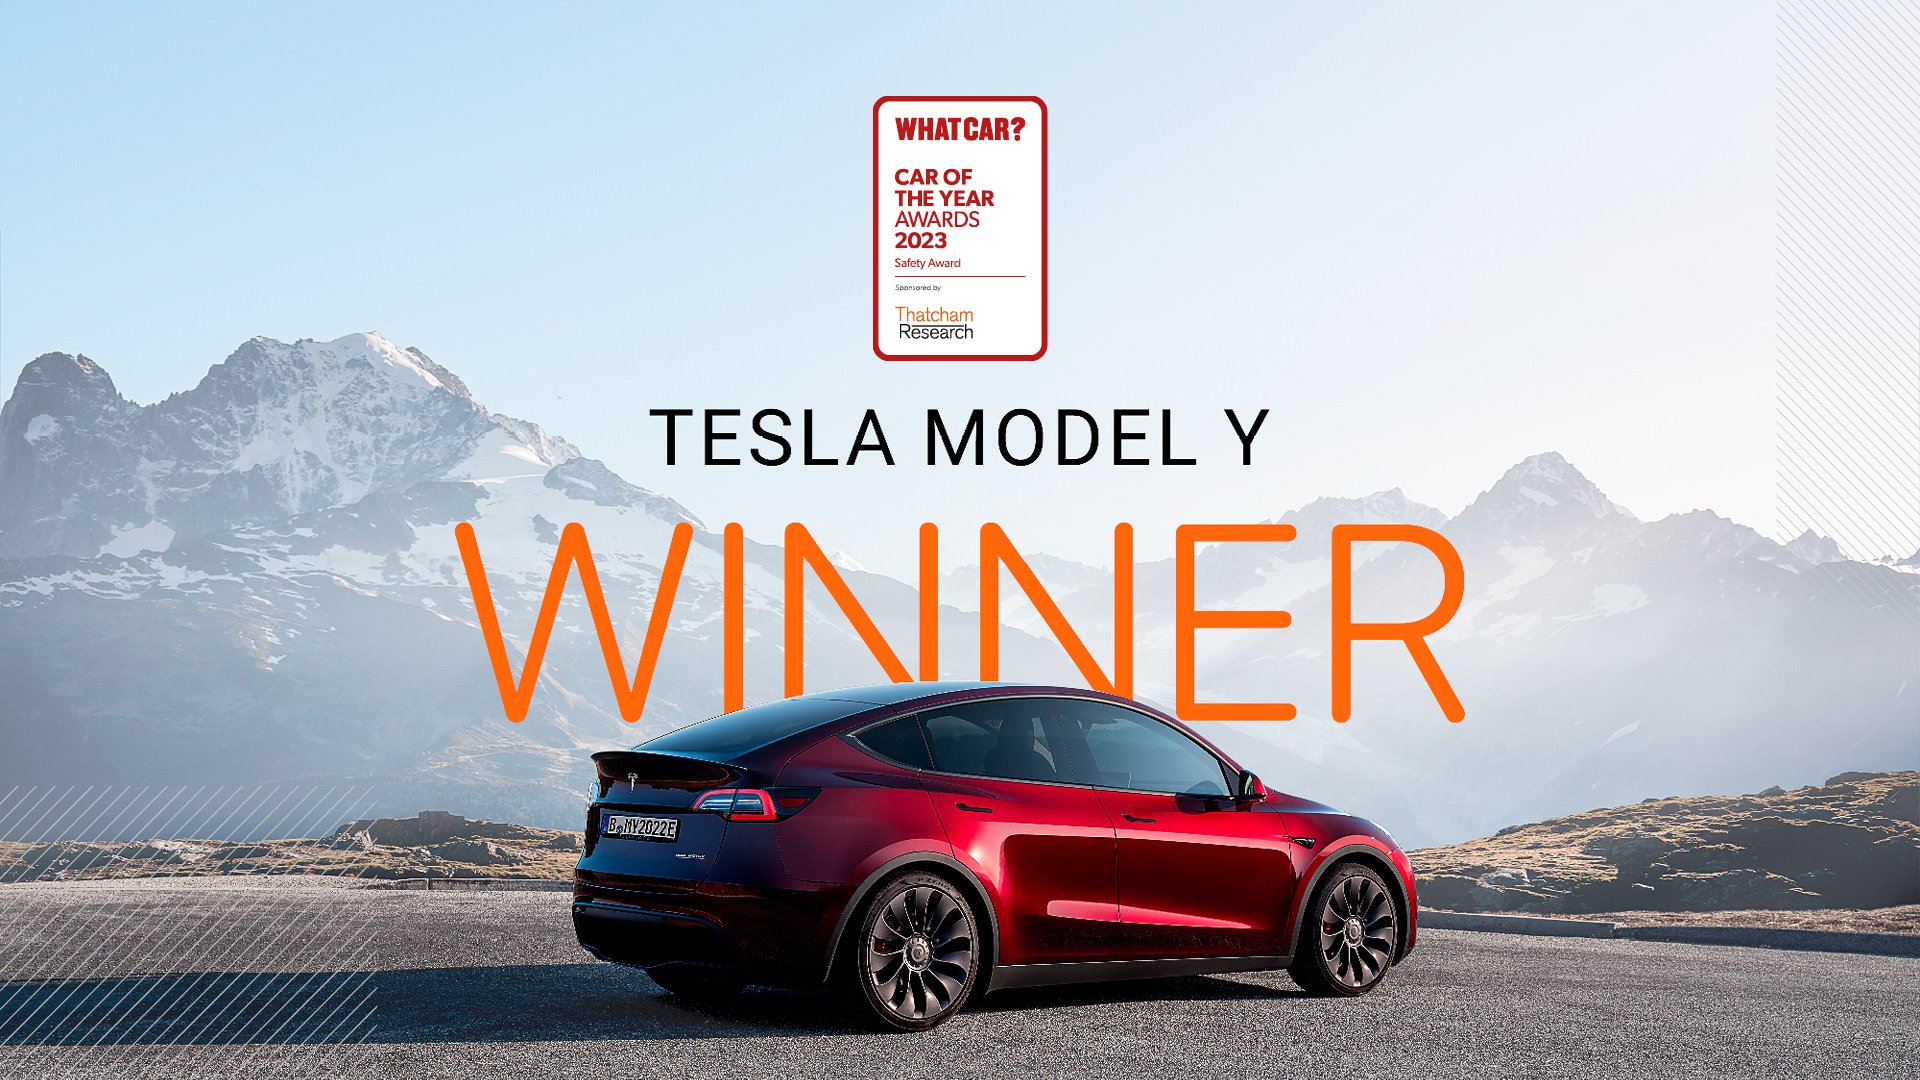 Tesla Model Y wins Safety Award from What Car?